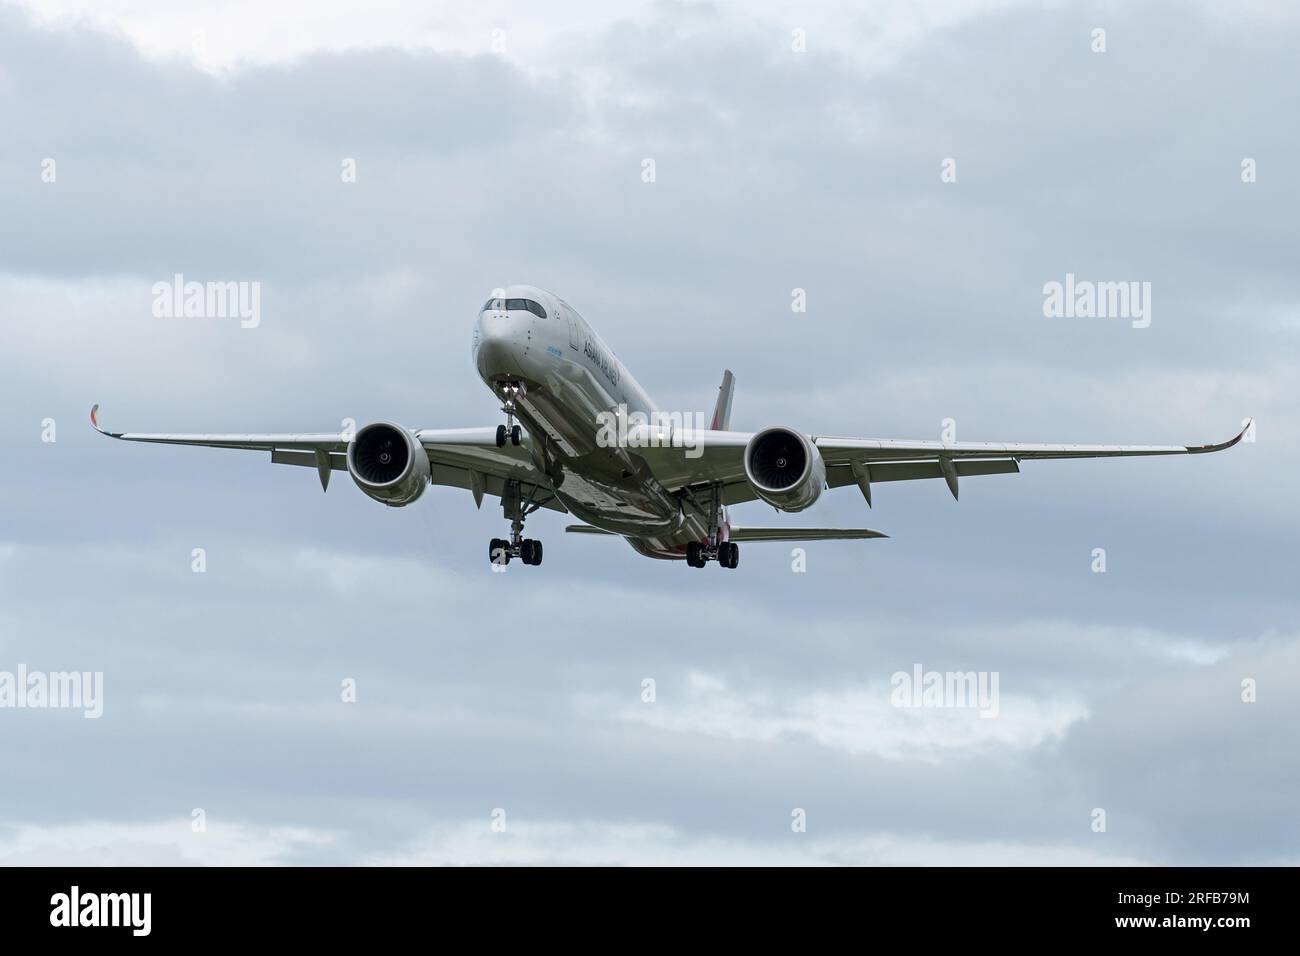 Asiana Airlines landing at London's Heathrow Airport. London - 1st August 2023 Stock Photo